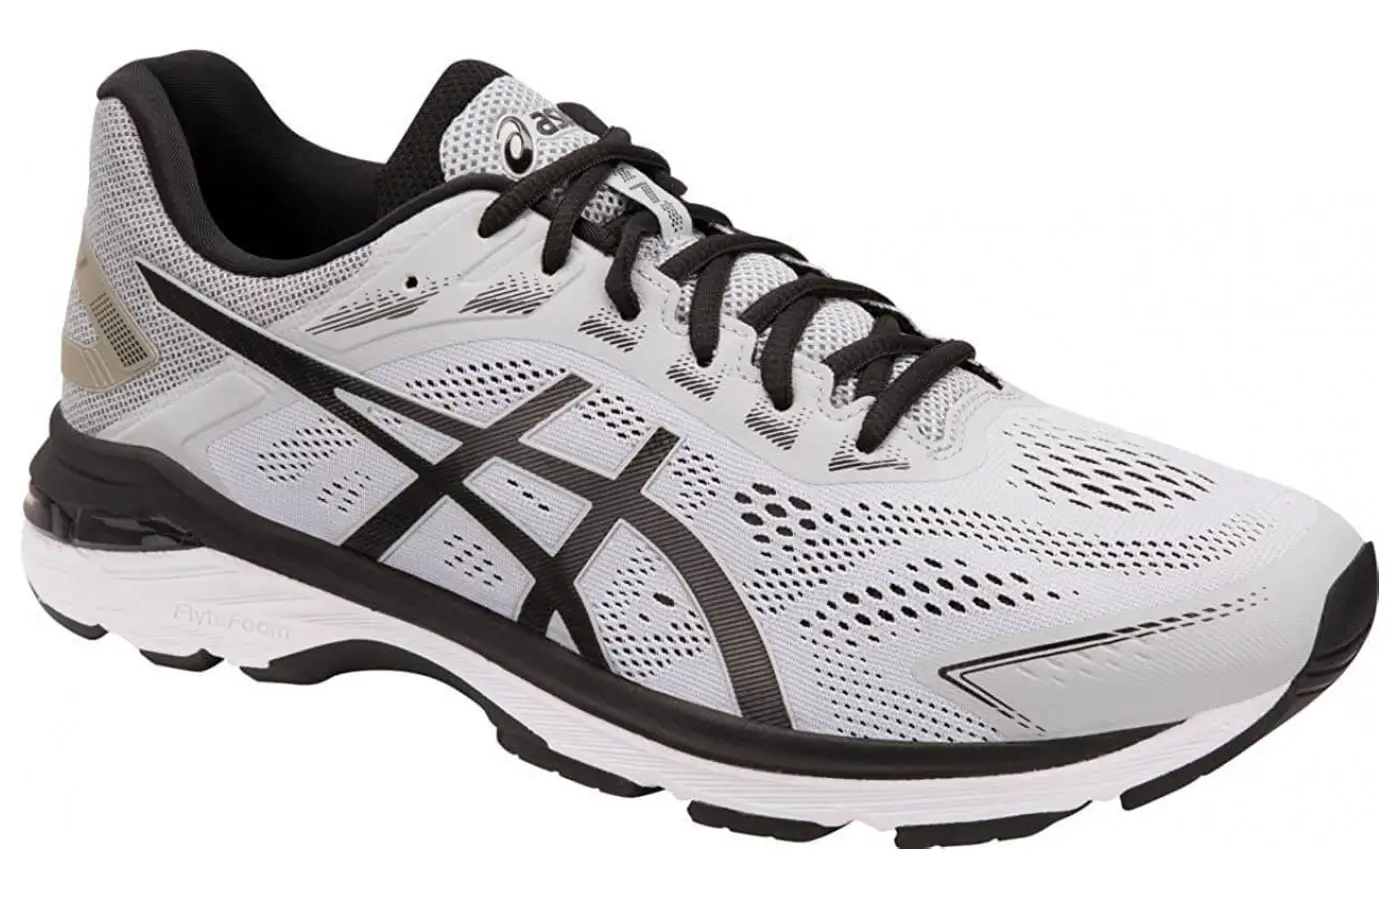 ASICS puts a lot of thought and engineering into developing a superior shoe in the GT 2000 line.